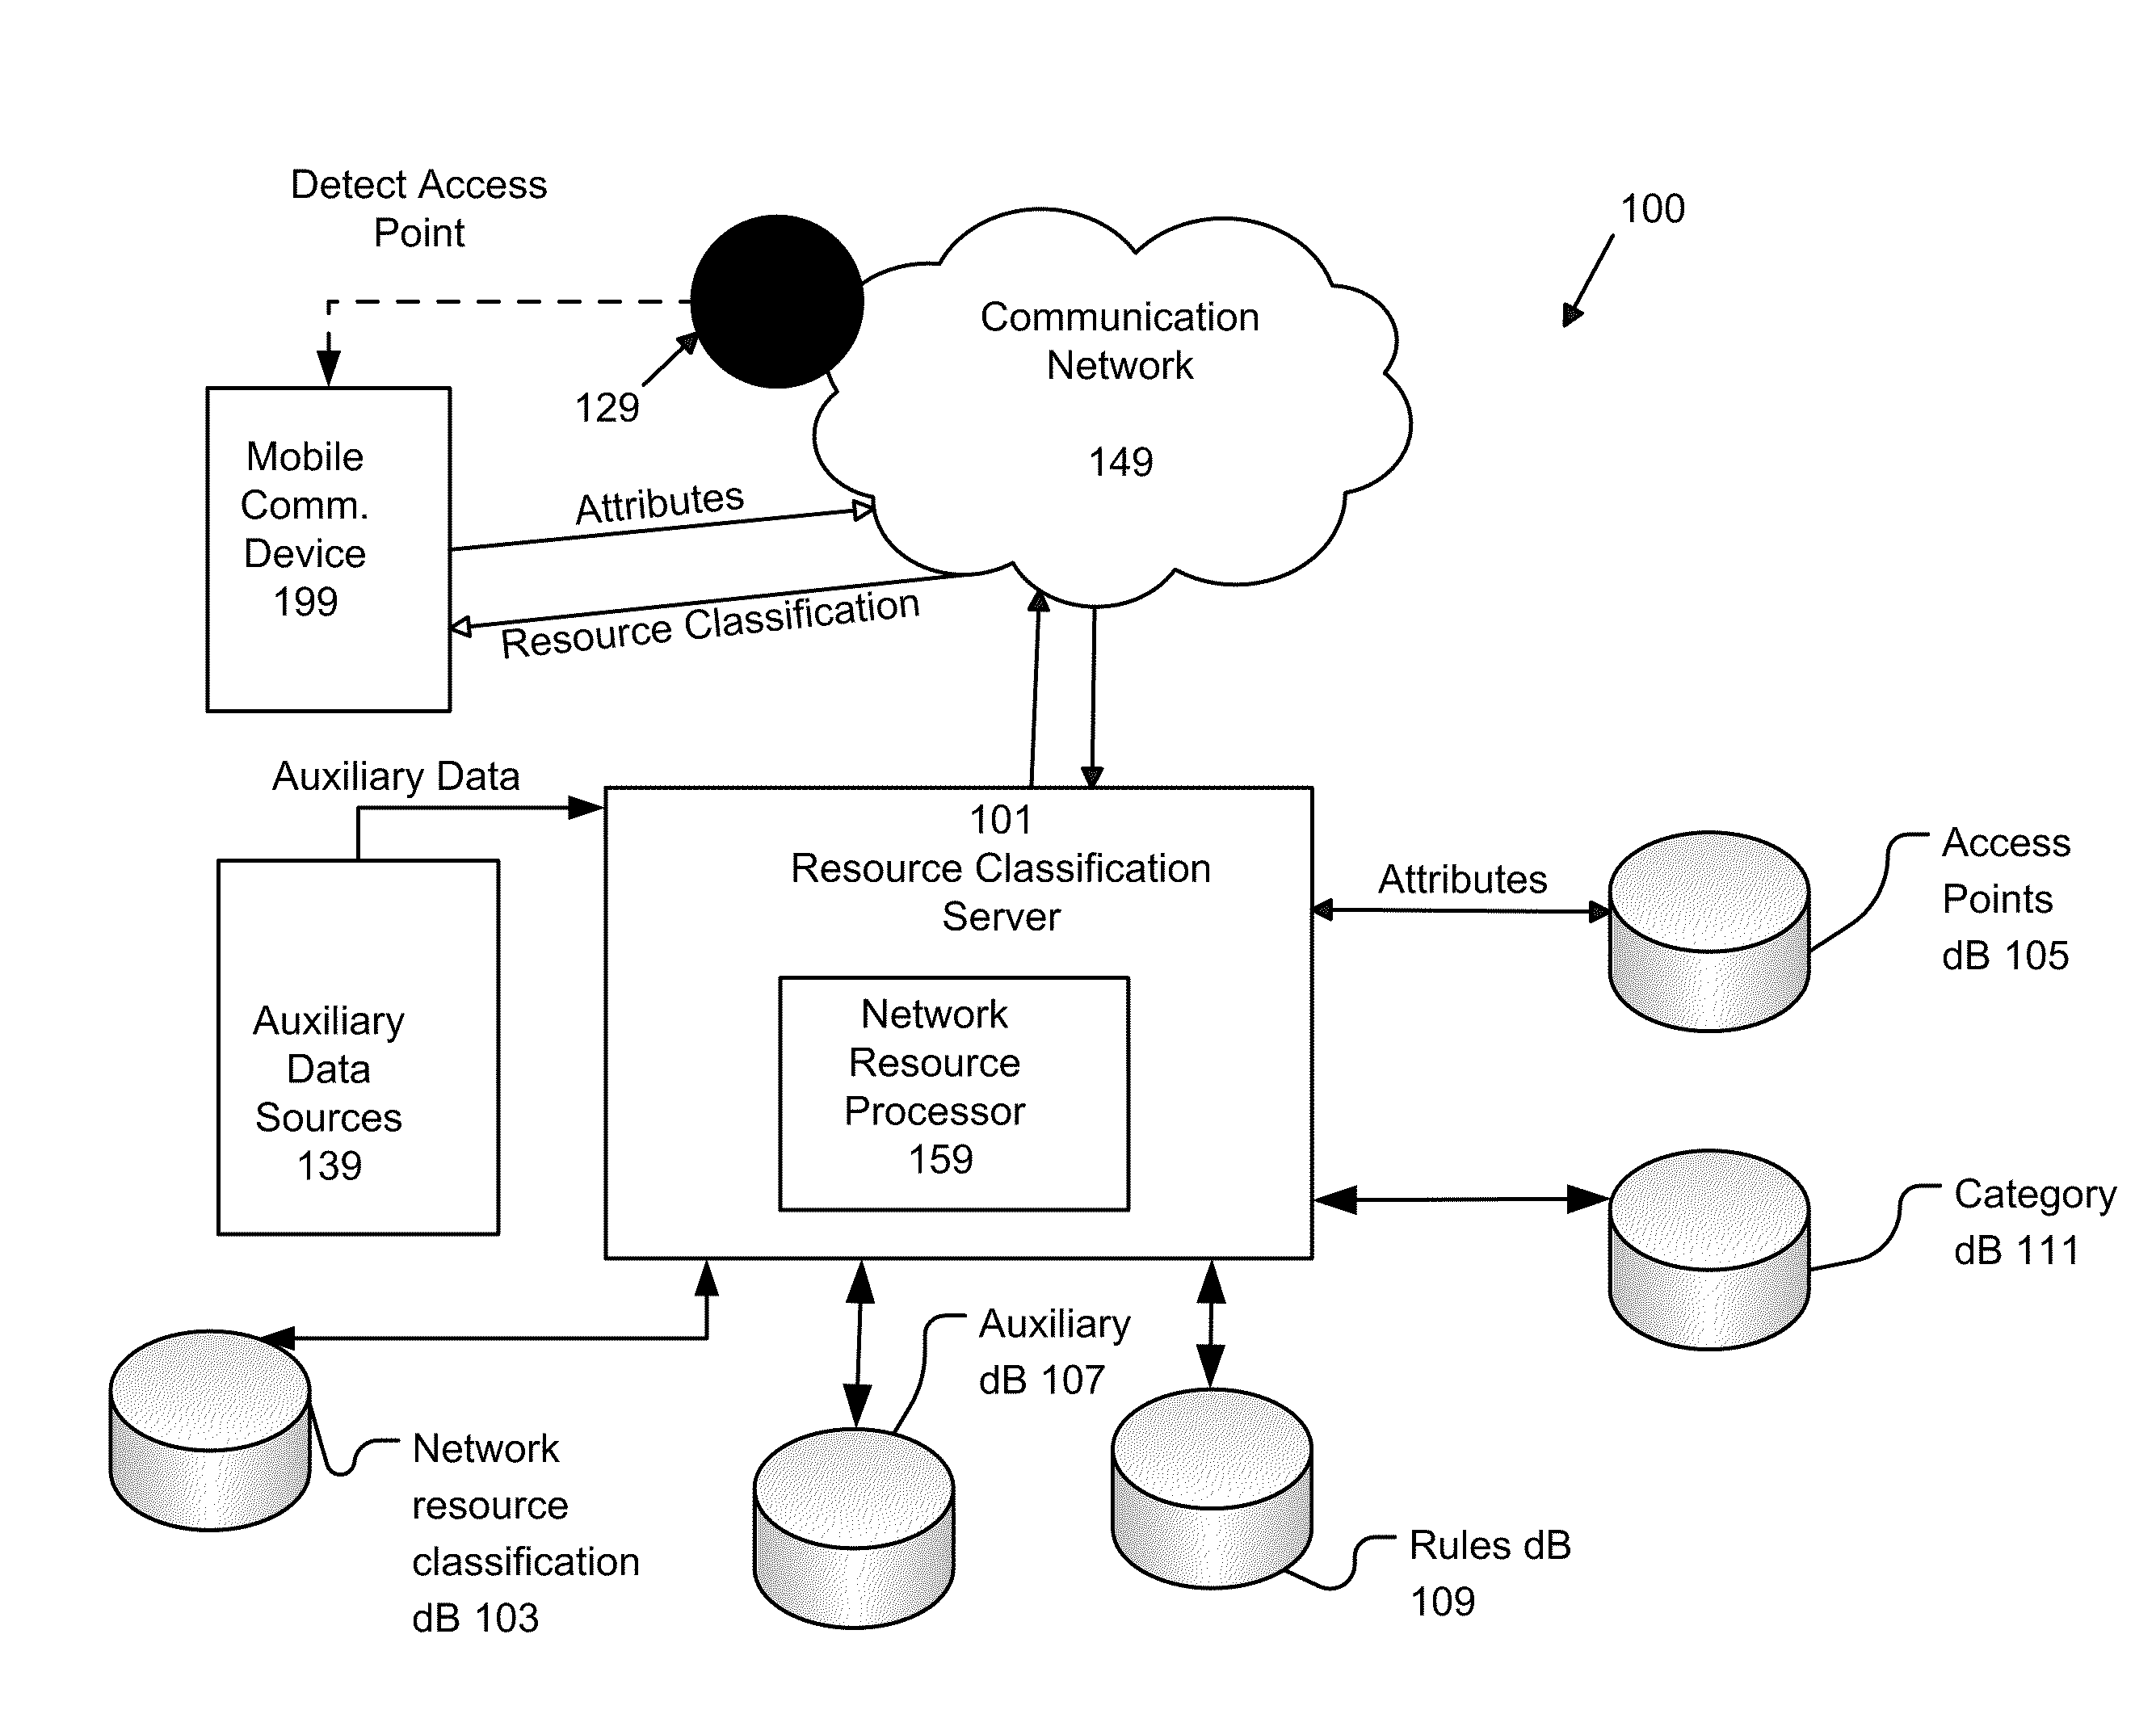 System and Method of Automatically Connecting a Mobile Communication Device to A Network Using a Communications Resource Database